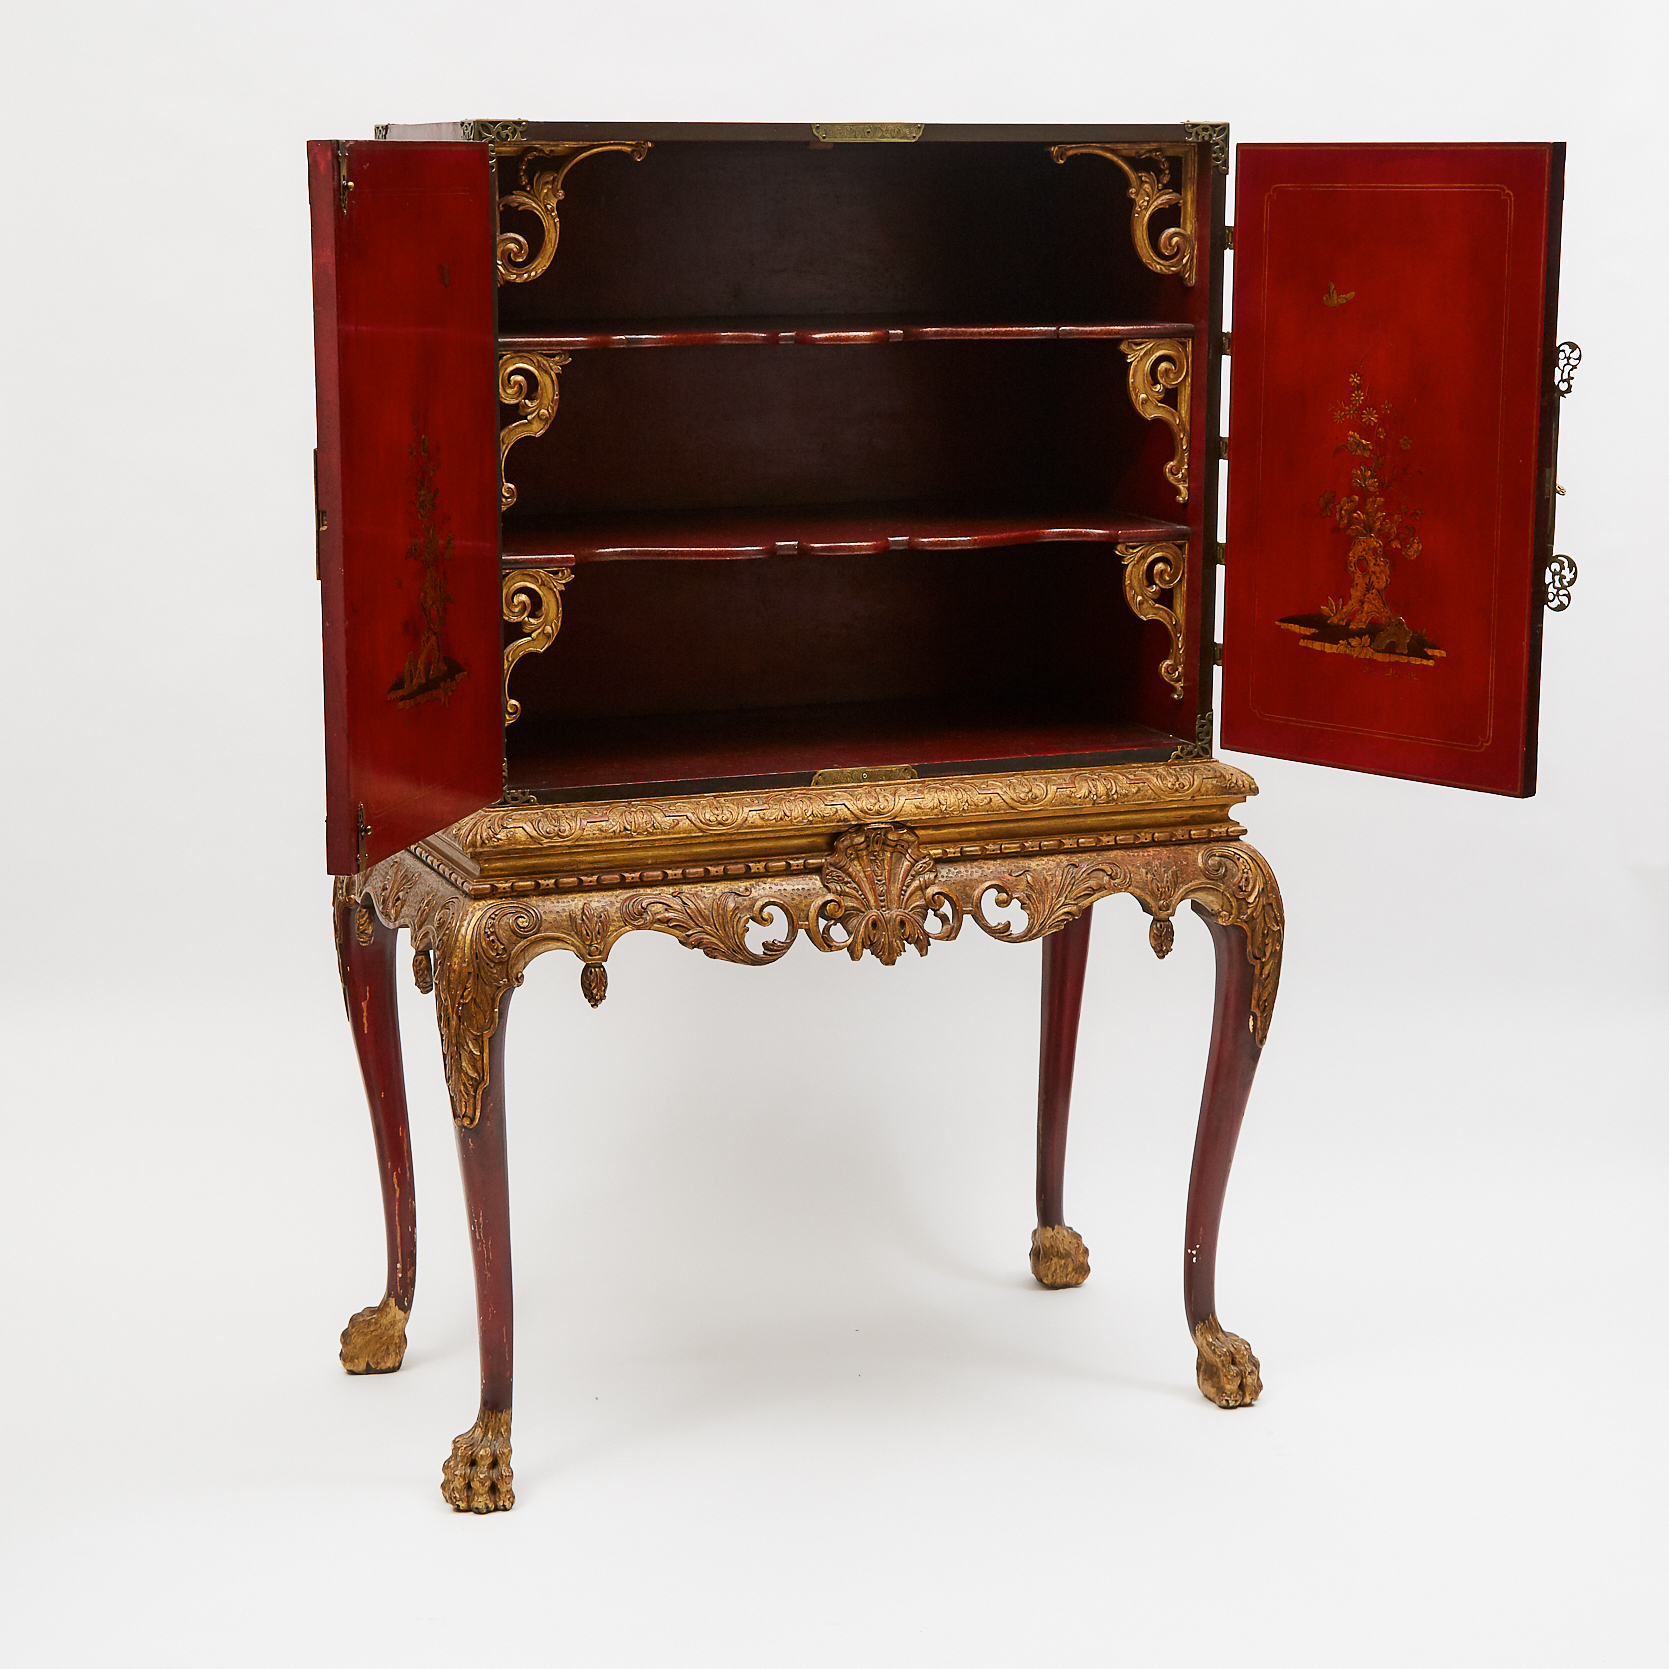 Chinoiserie Red Japanned Cabinet on Stand, early 20th century